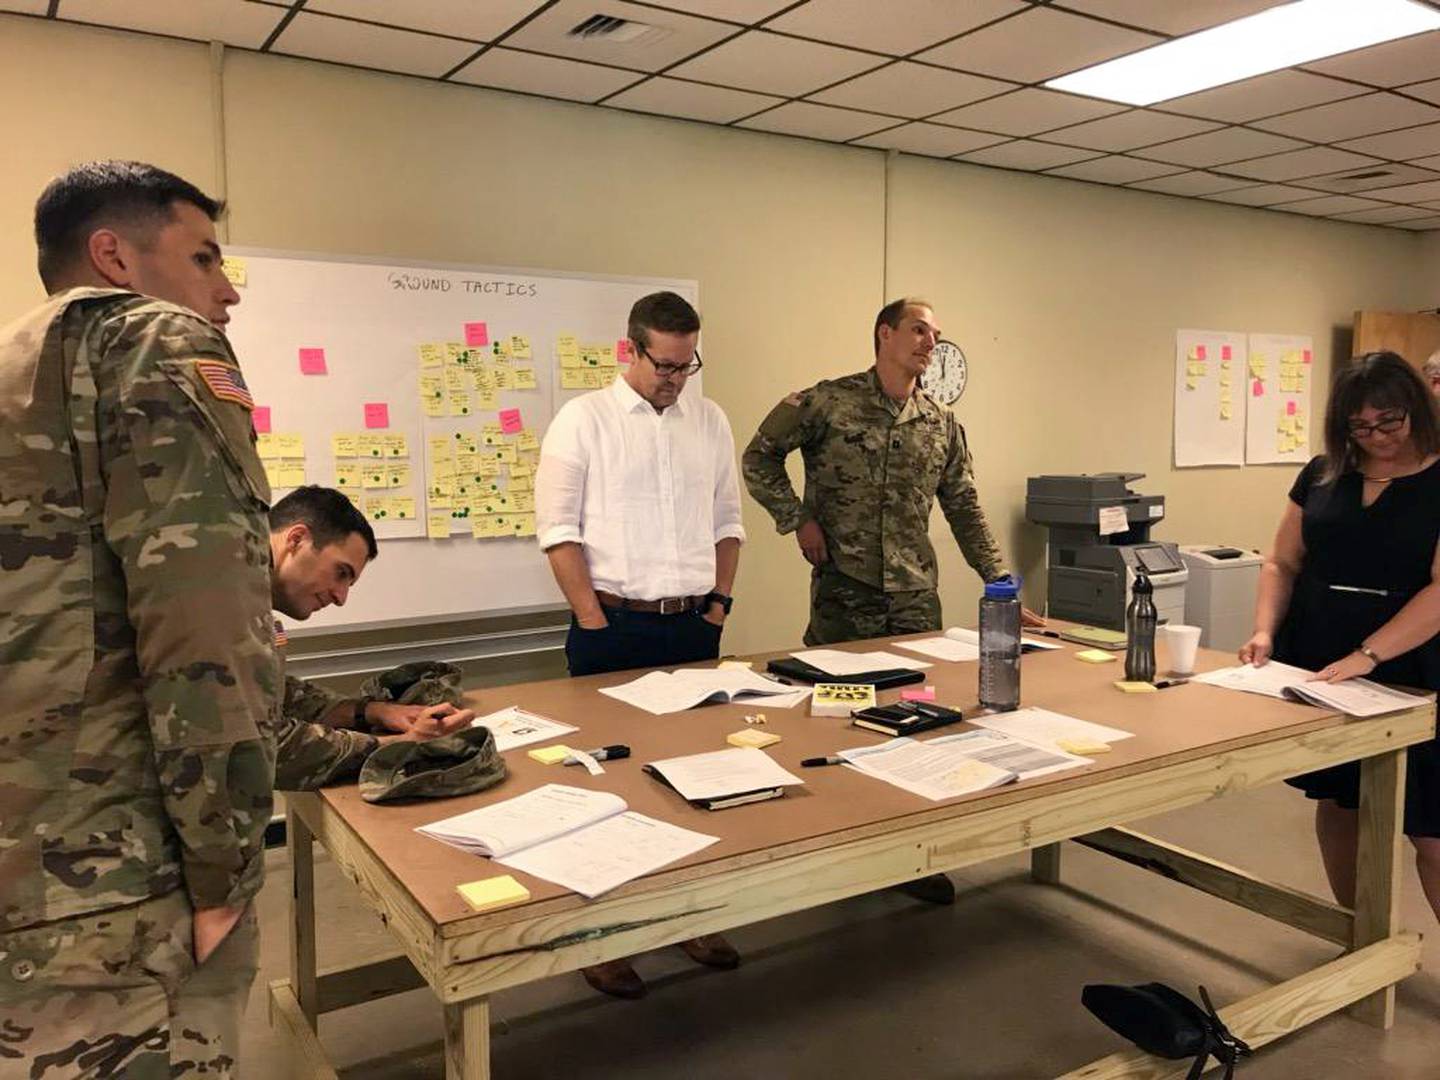 Vanderbilt University faculty and representatives from the 101st Airborne Division (Air Assault) participate in a design workshop at EagleWerx at Fort Campbell, Kentucky.